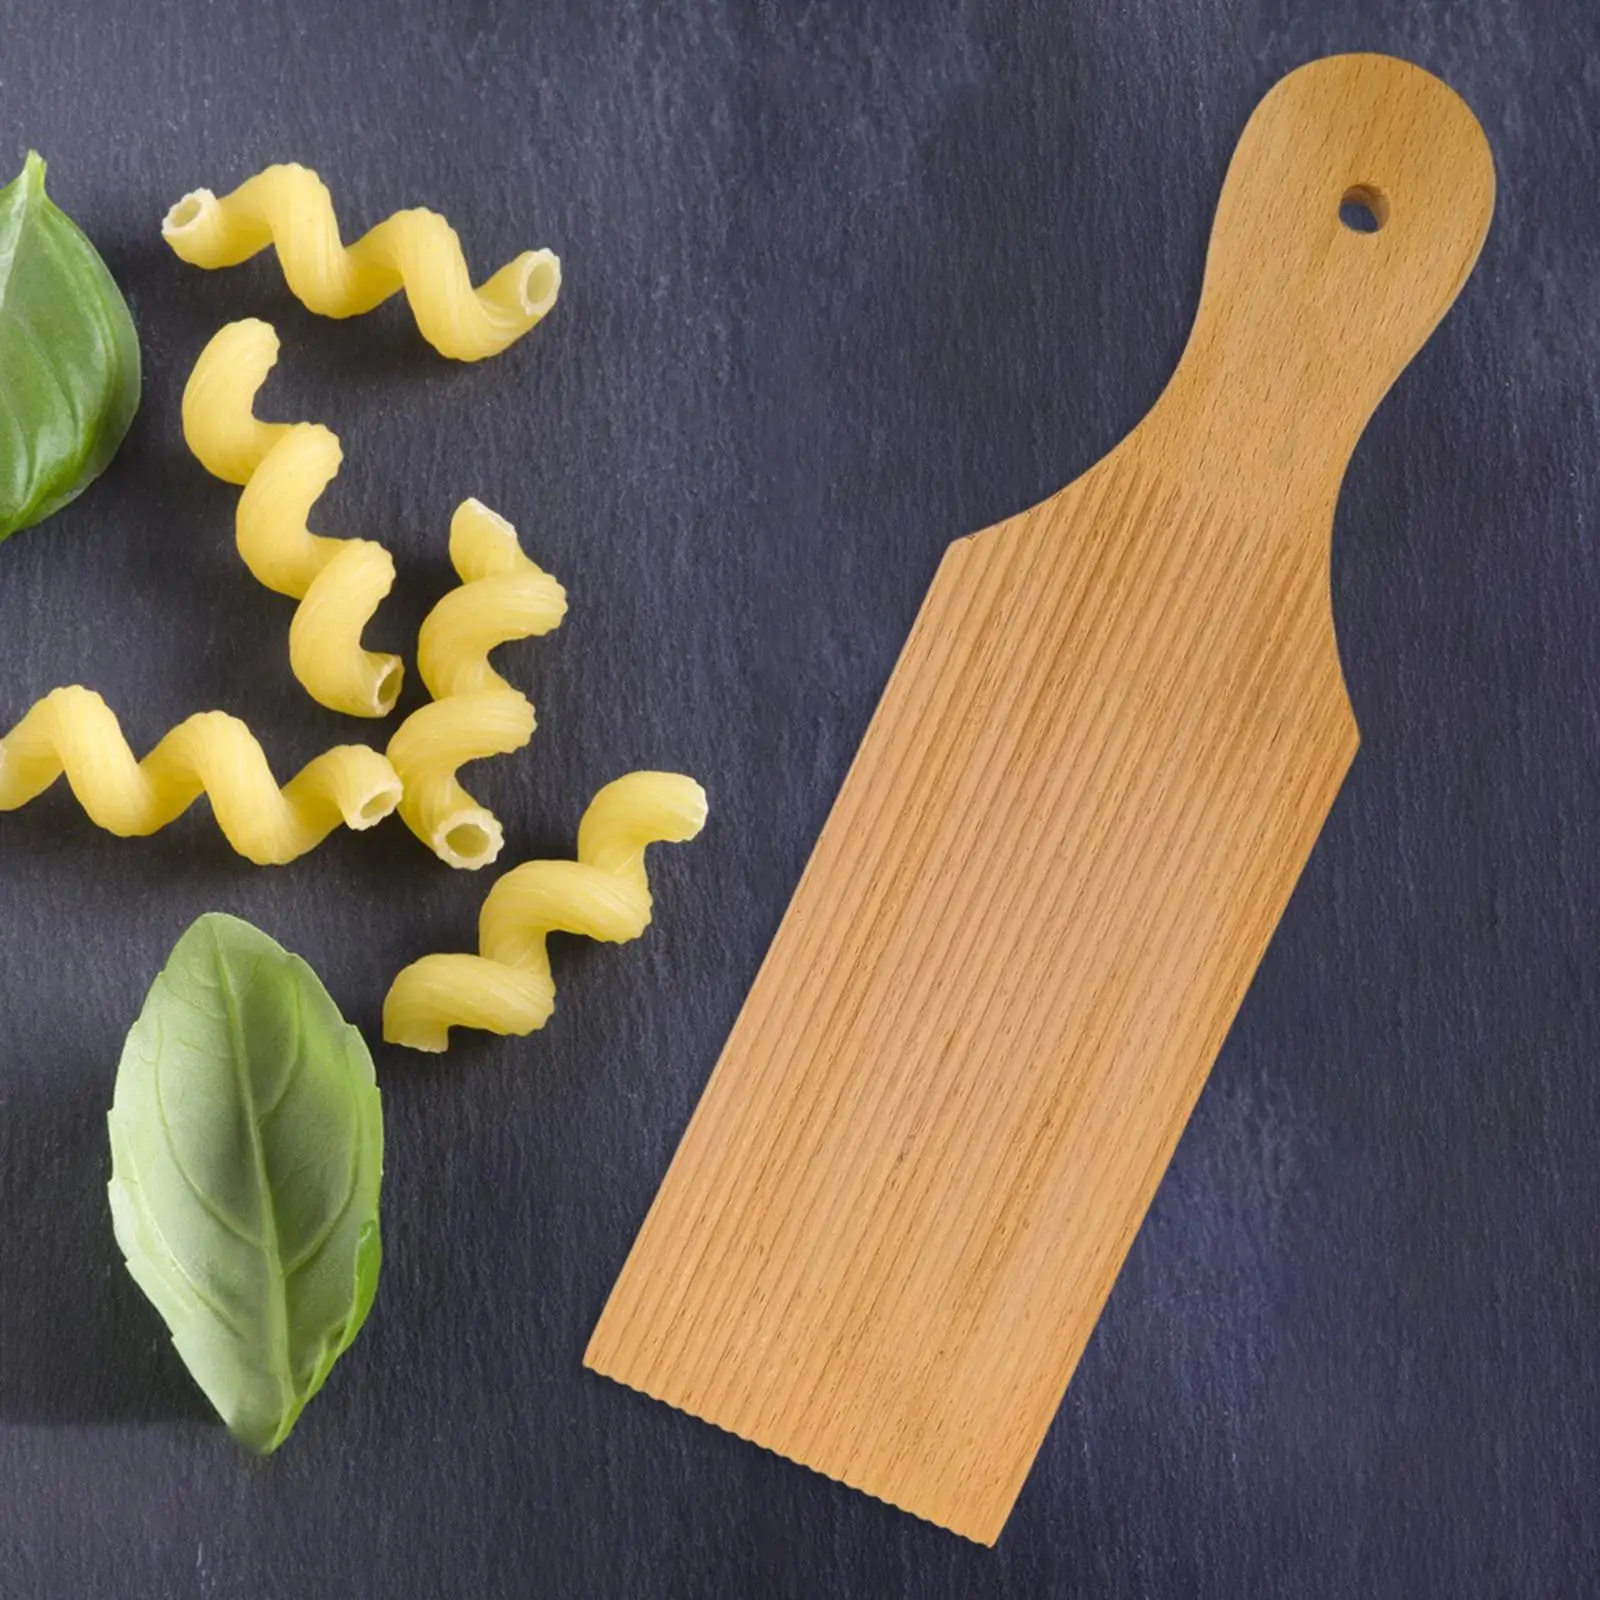 Gnocchi Pasta Plate Spiral Noodle Tool for Homemade pasta Home